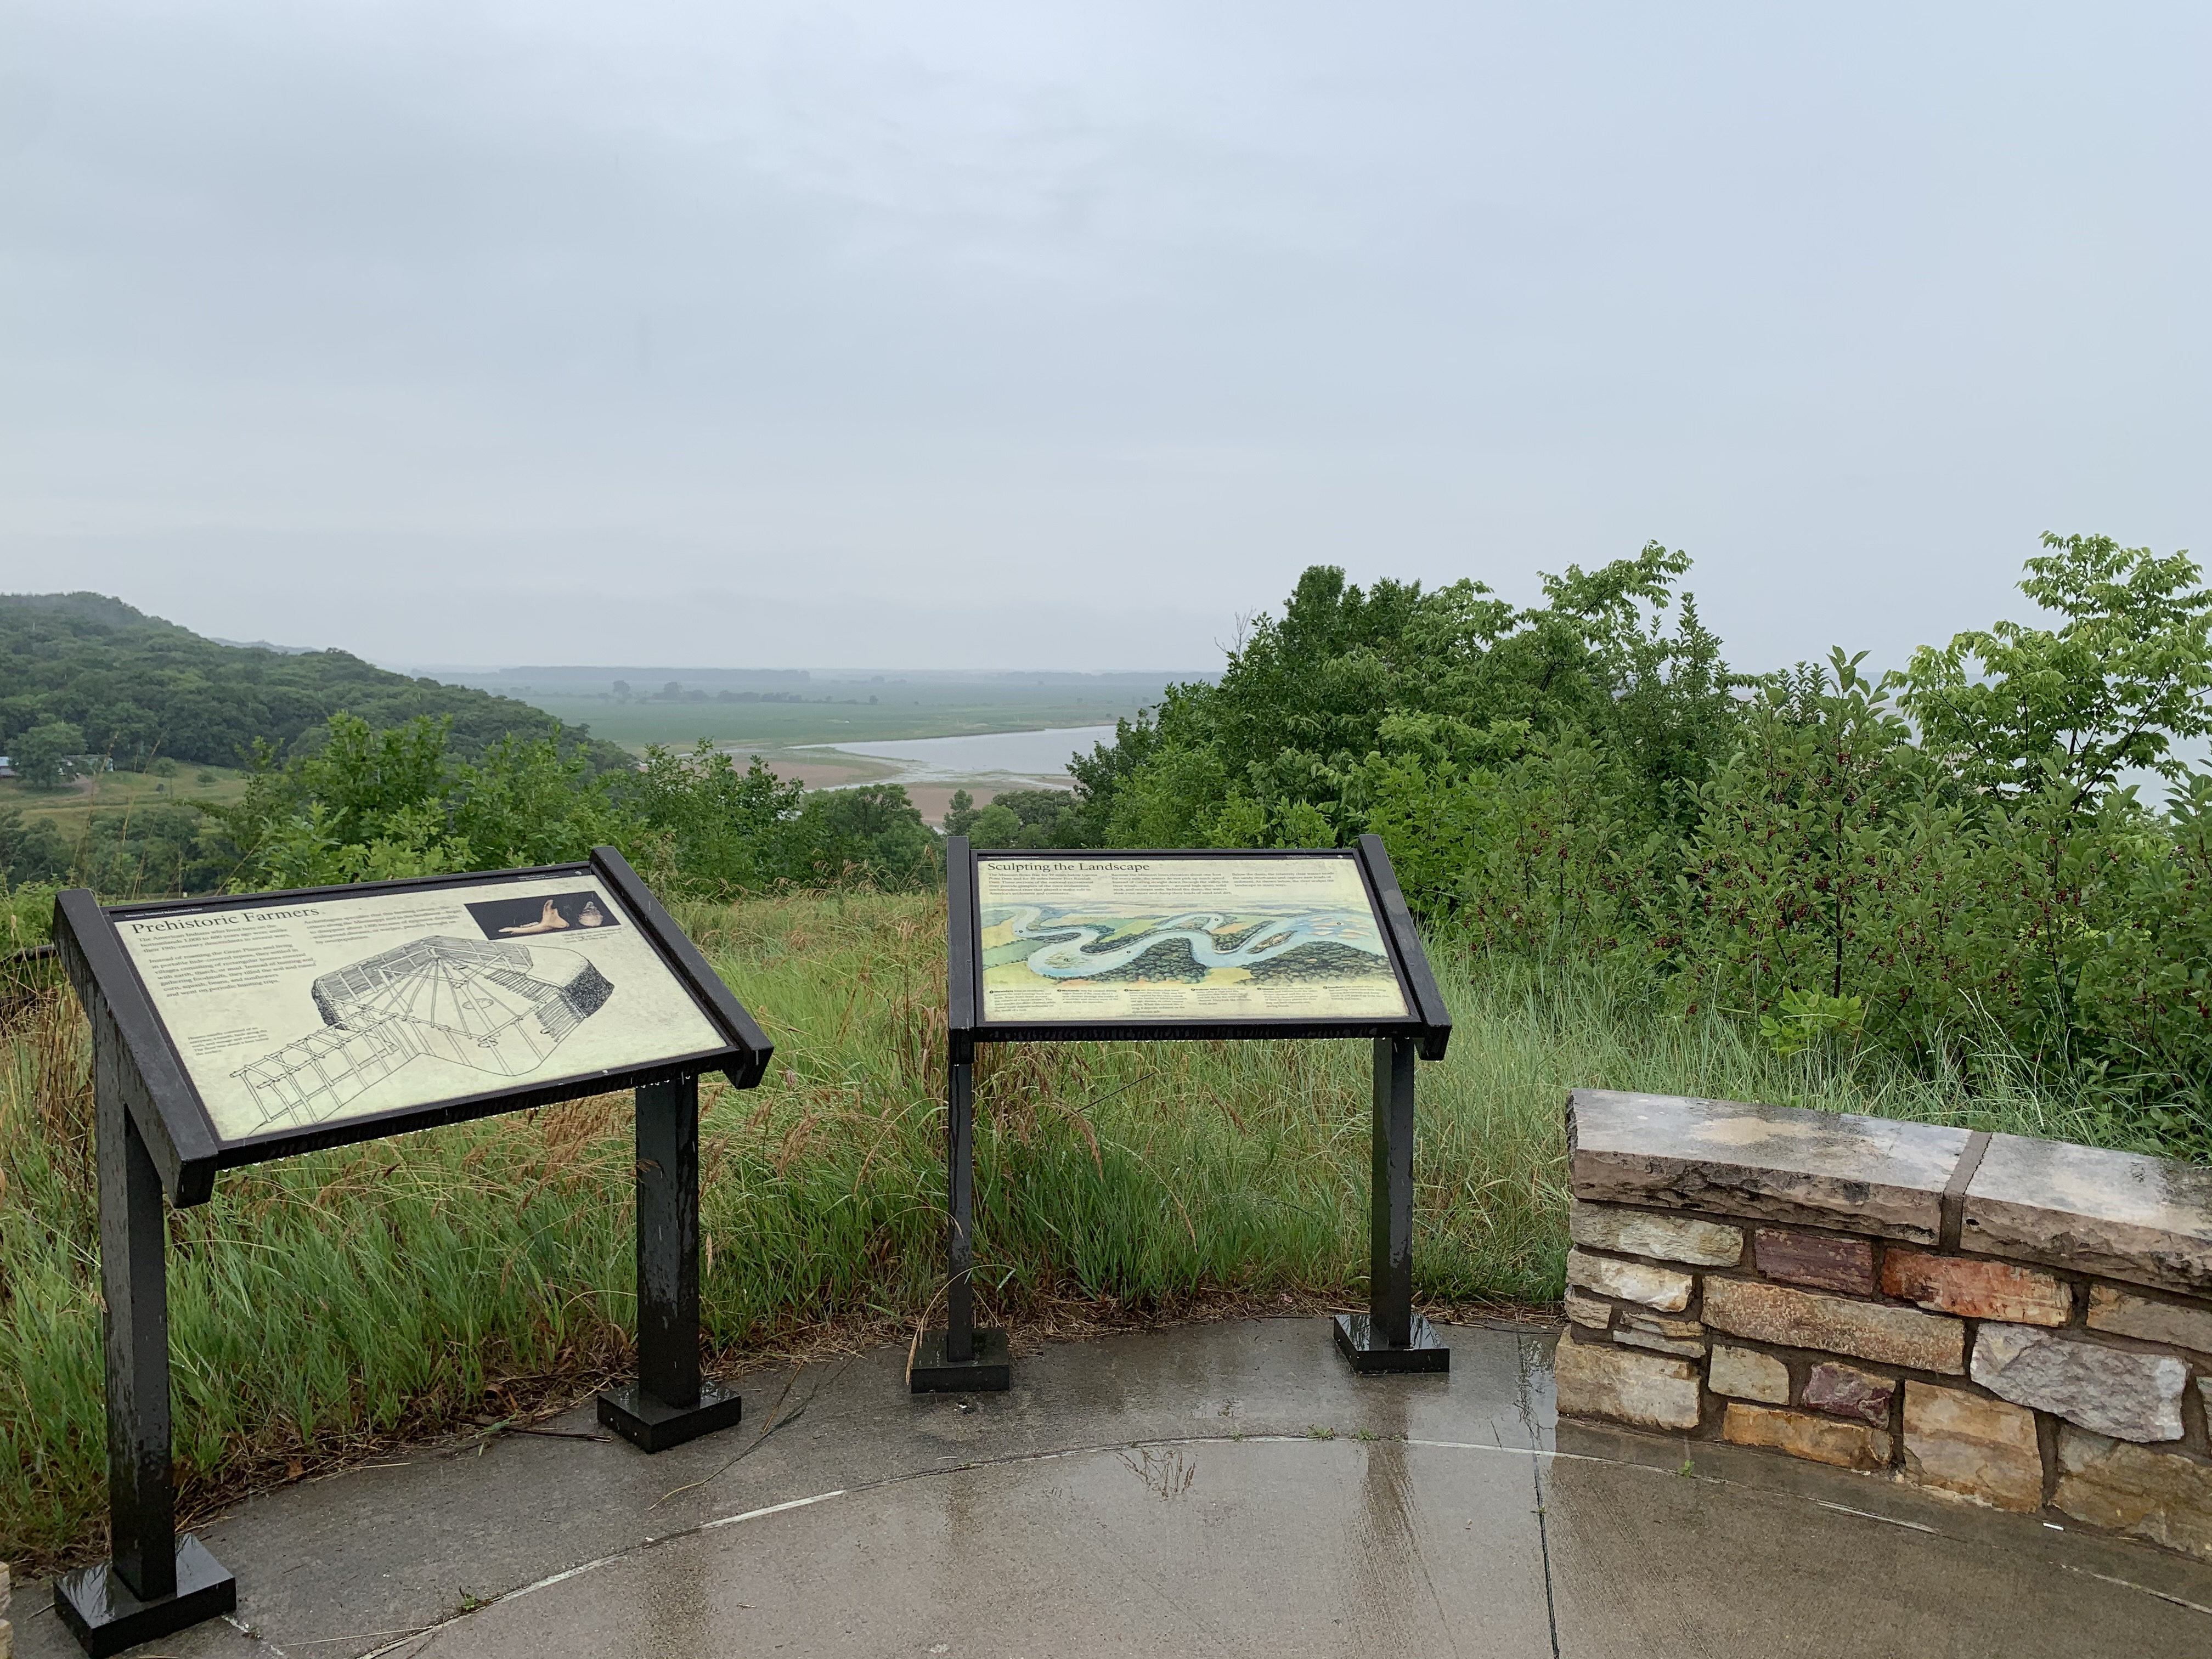 Two waysides and a stone wall overlooking the Missouri River. There are green trees and sandbars in the river.